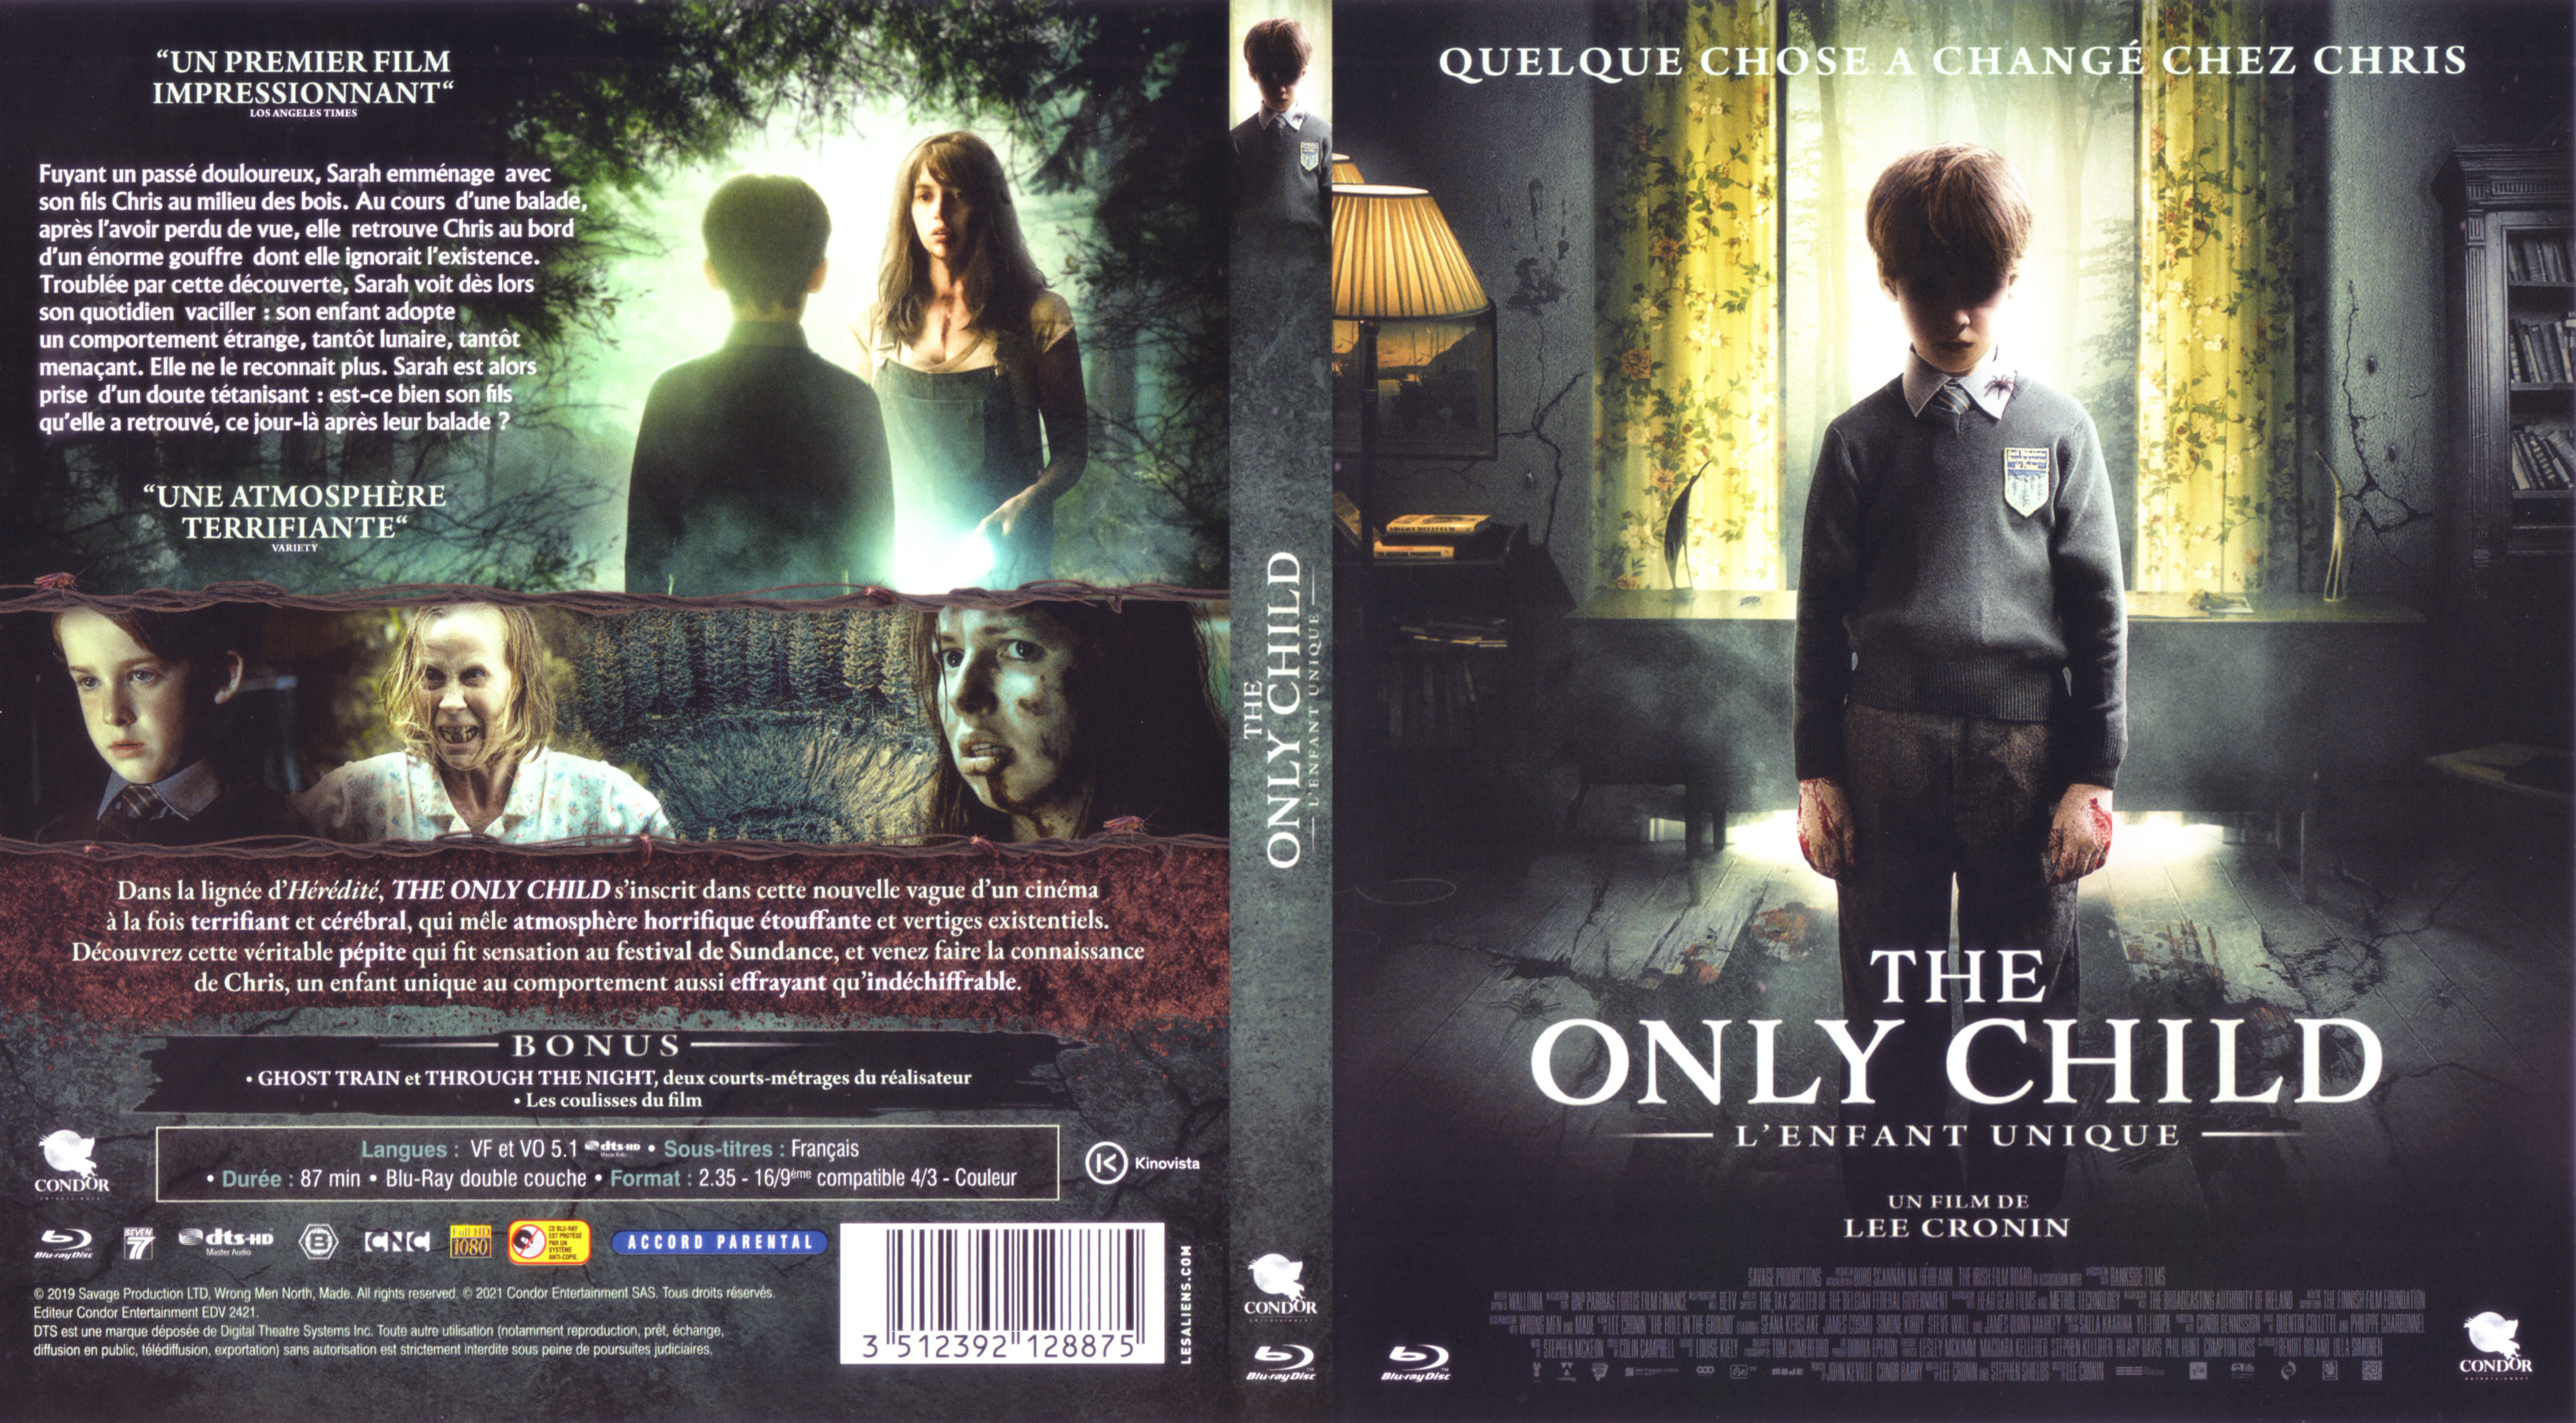 Jaquette DVD The only child (BLU-RAY)